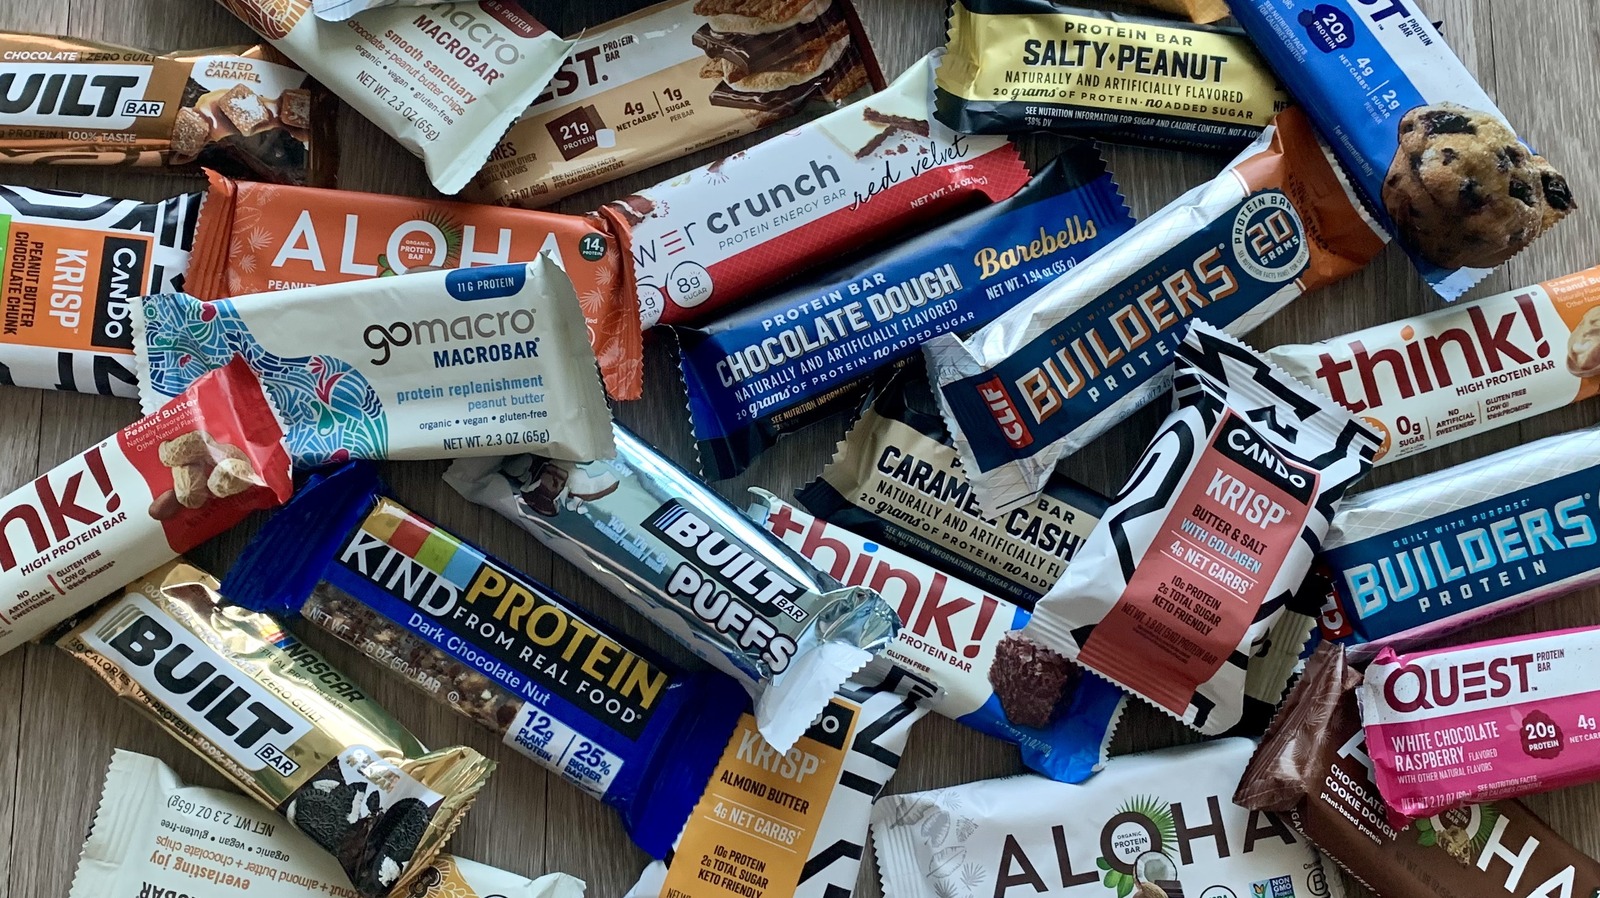 We rank the many delicious flavors of the Barebells Protein Bar